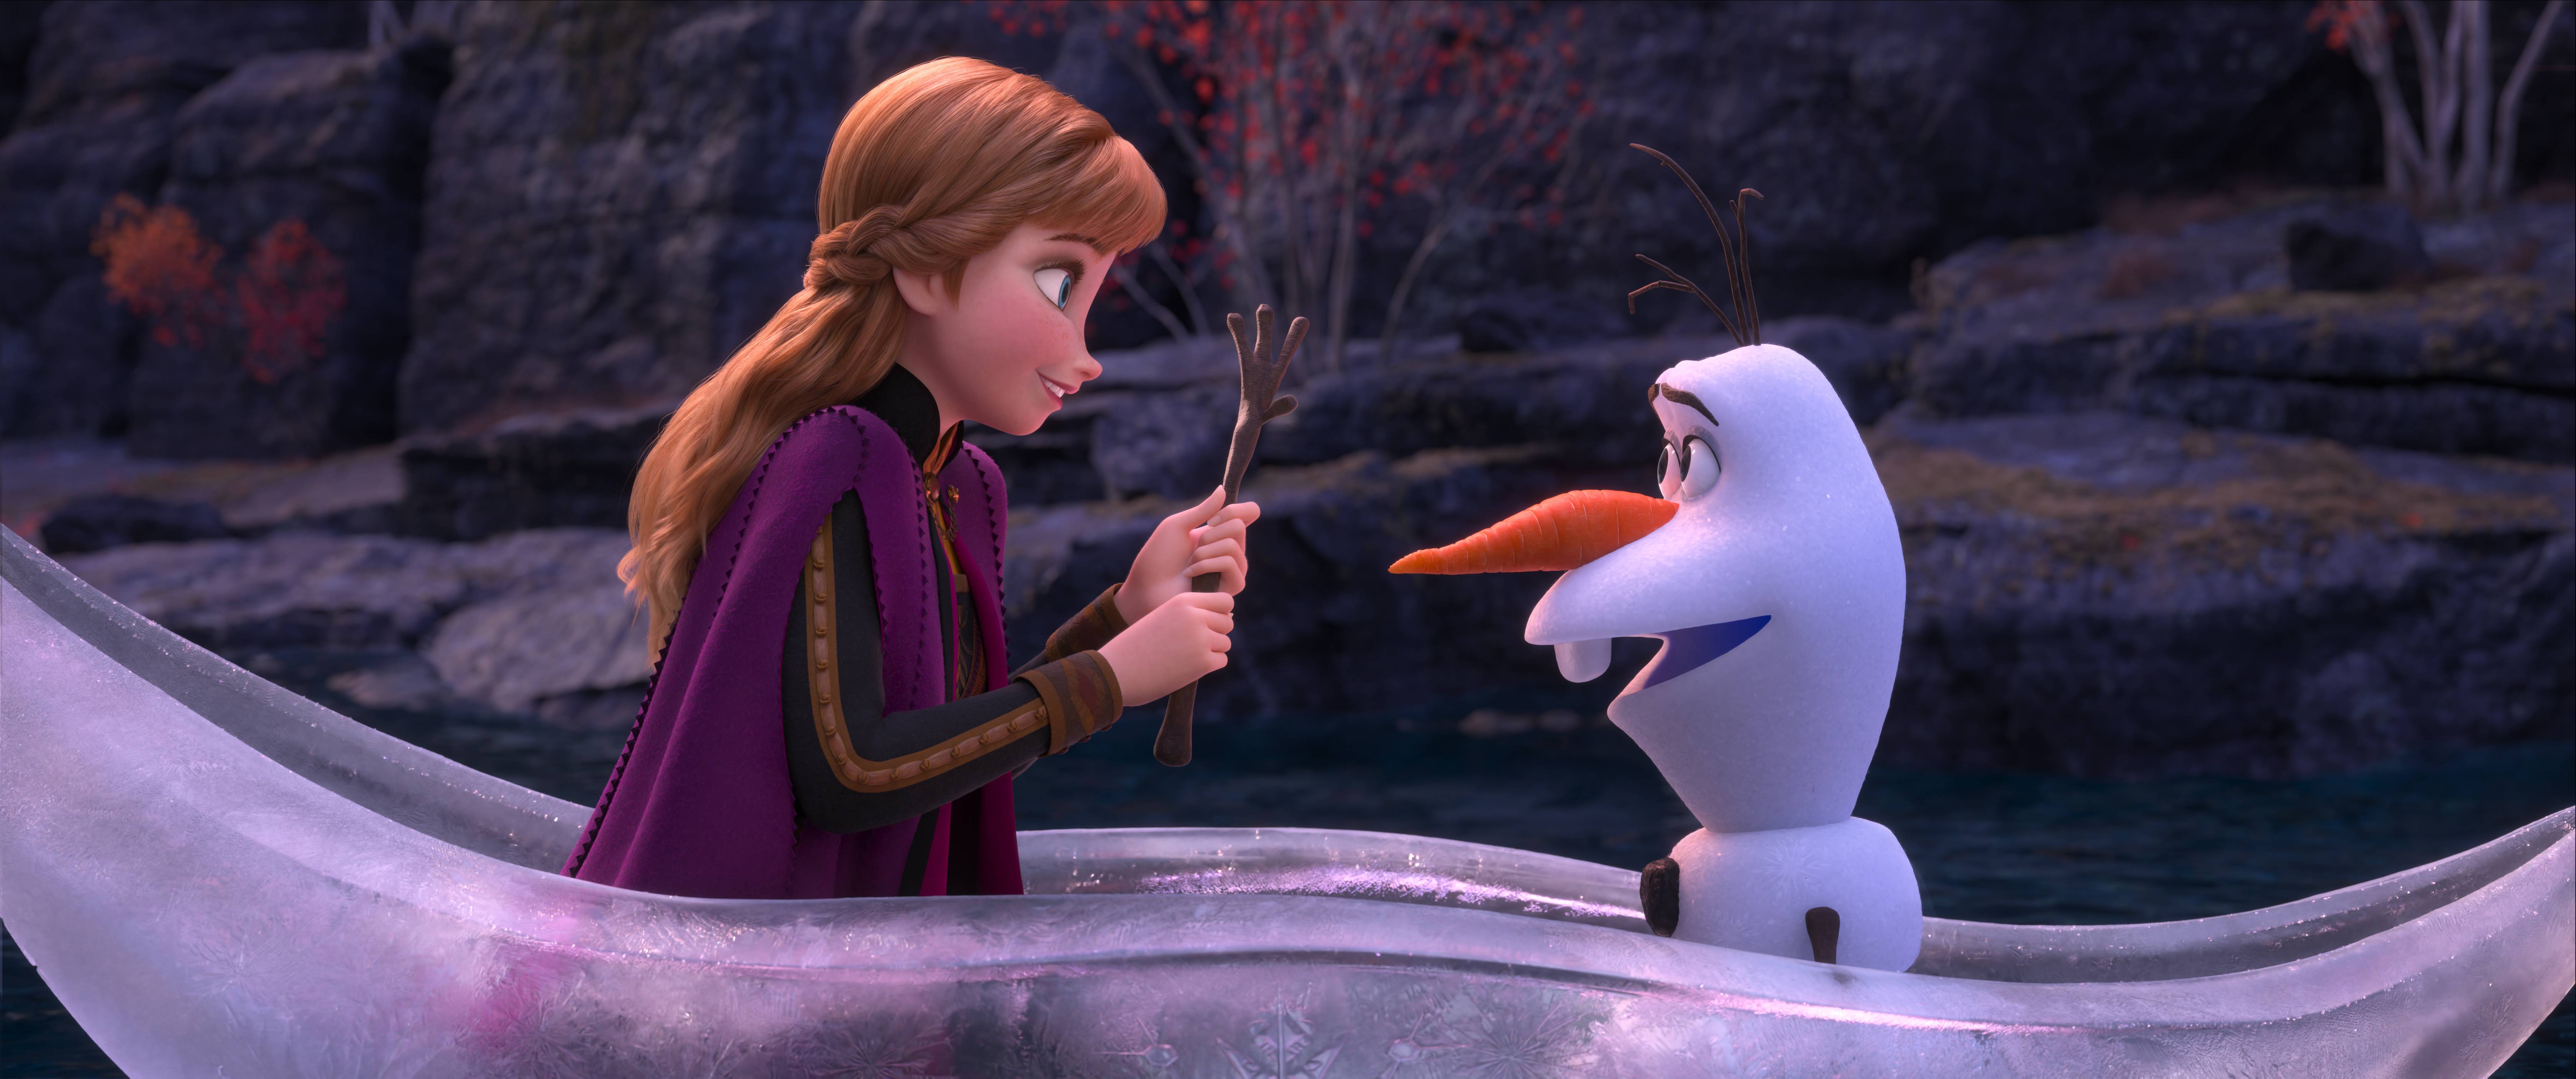 Frozen 2' trailer: Elsa and Anna go on a whole new adventure